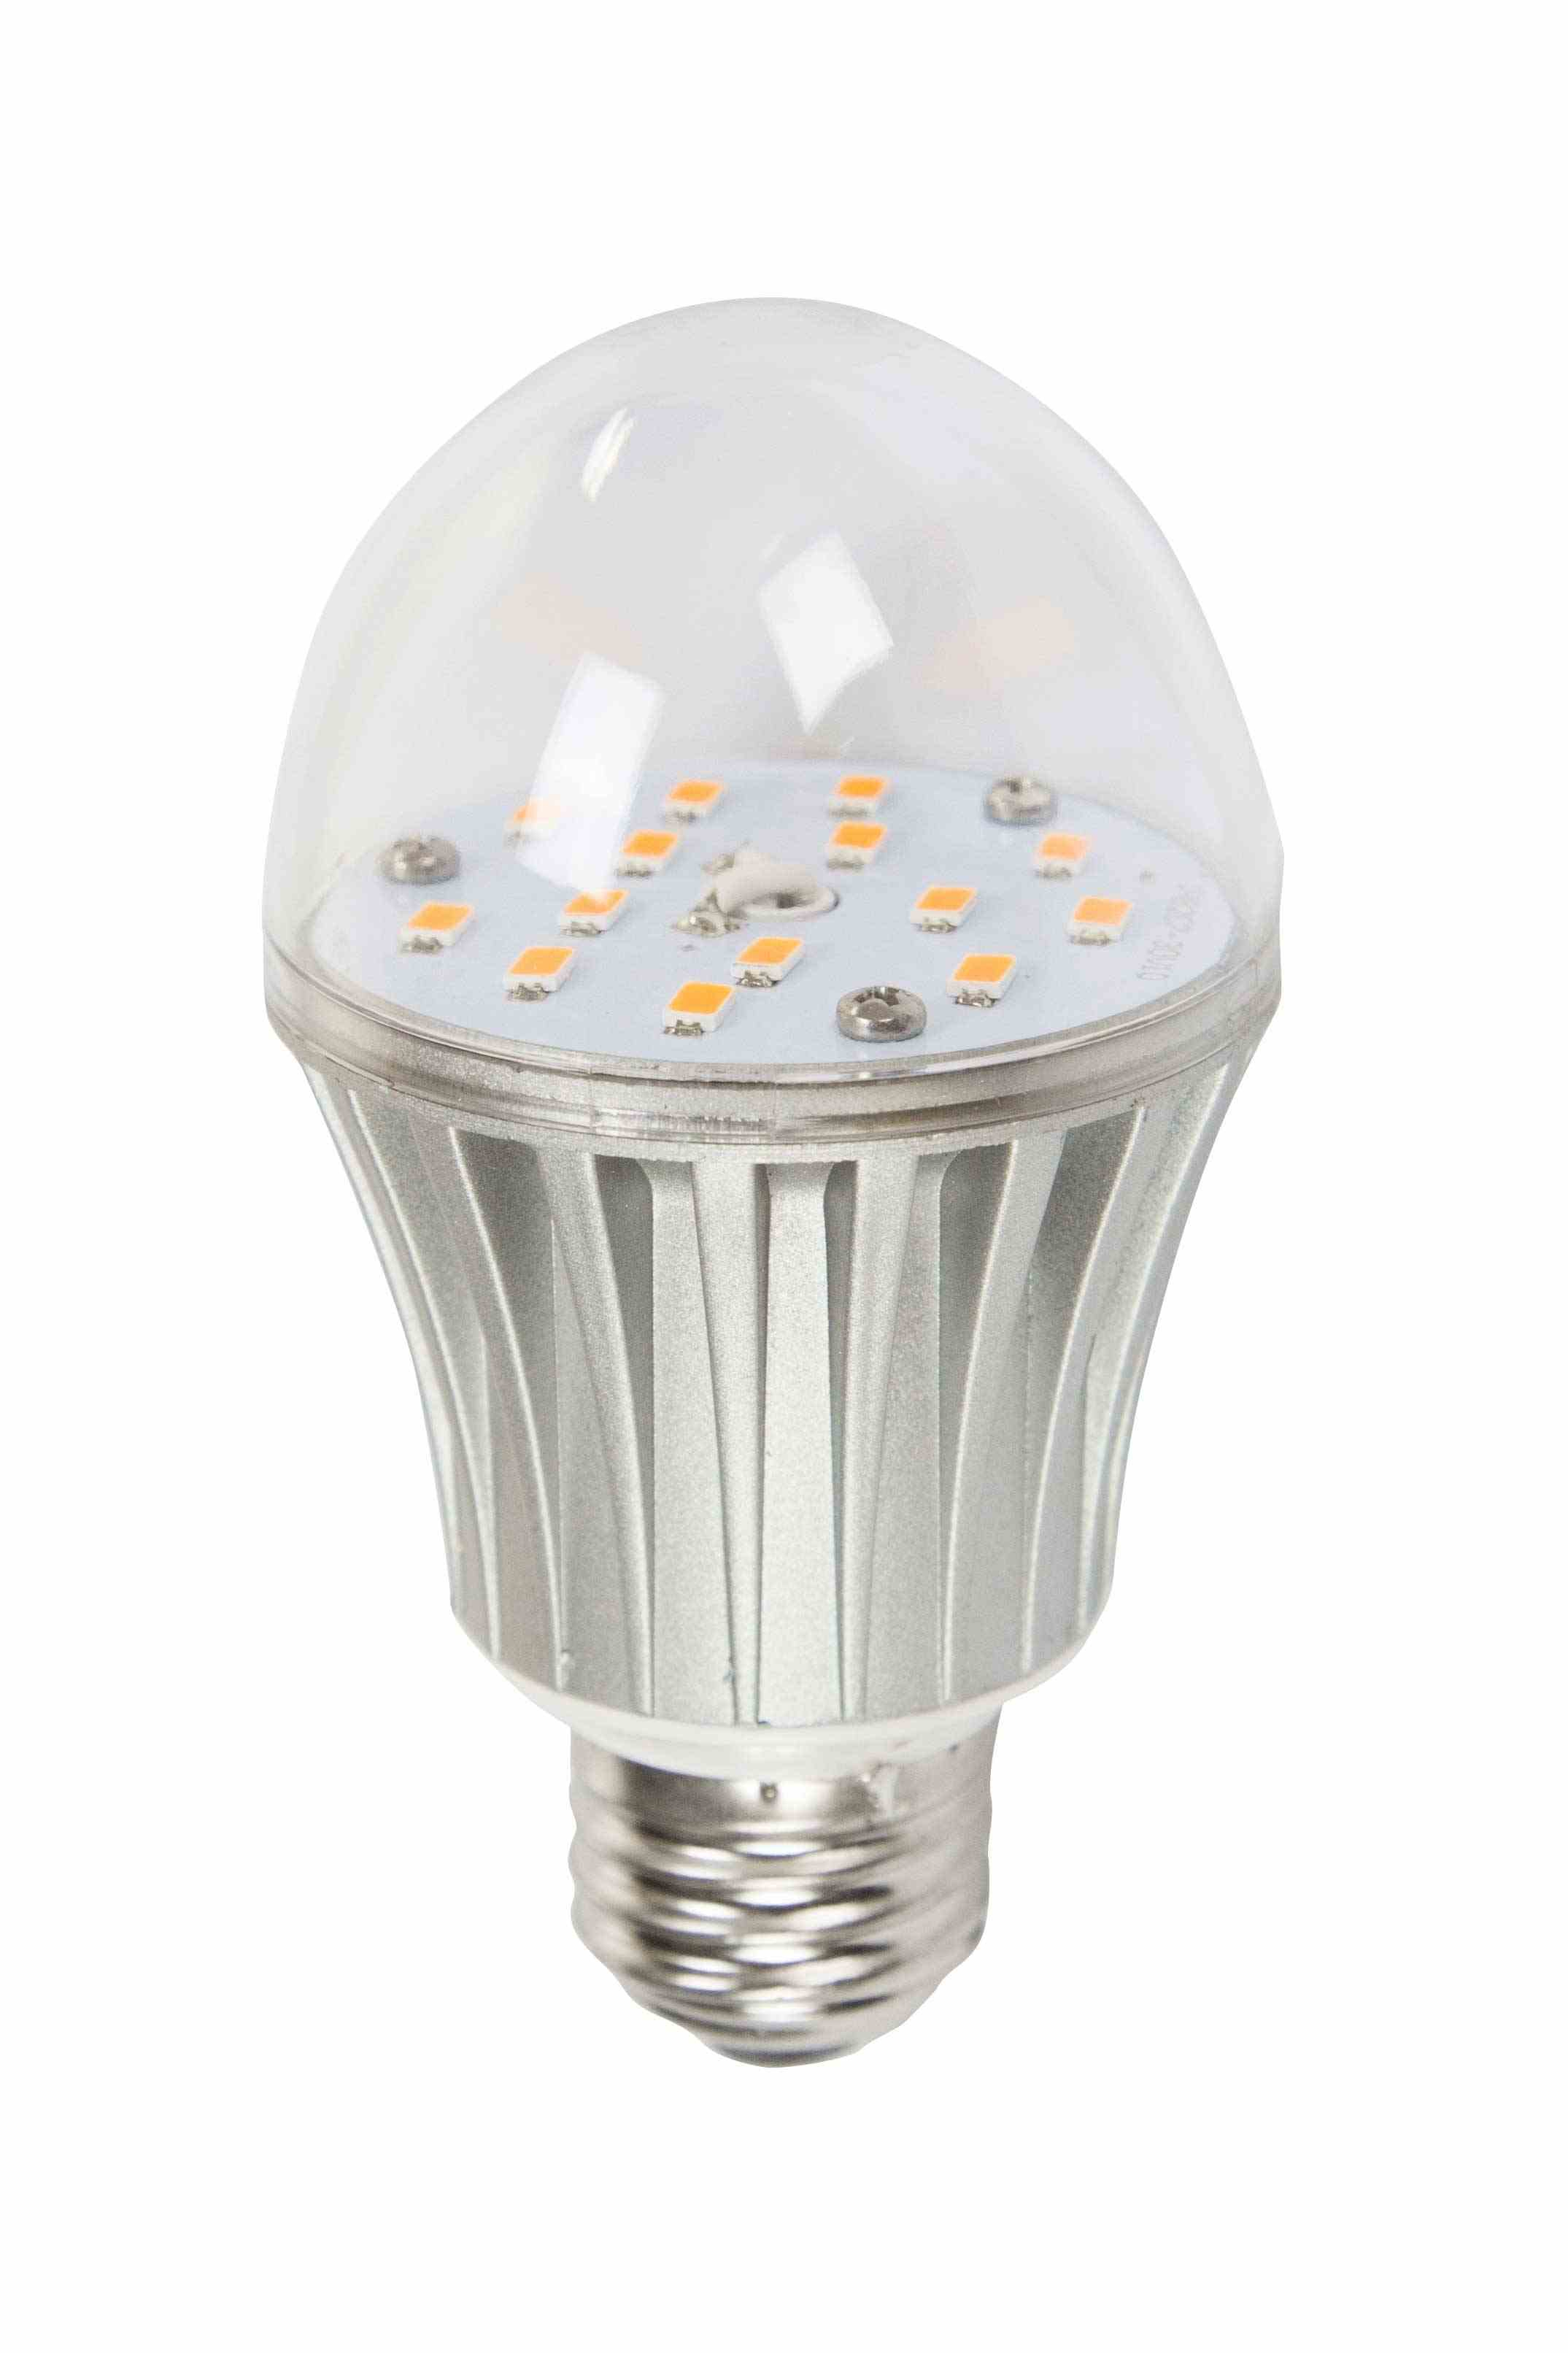 Led A19 Style Replacement For Standard E26 Light Bulb Socket with dimensions 2149 X 3224